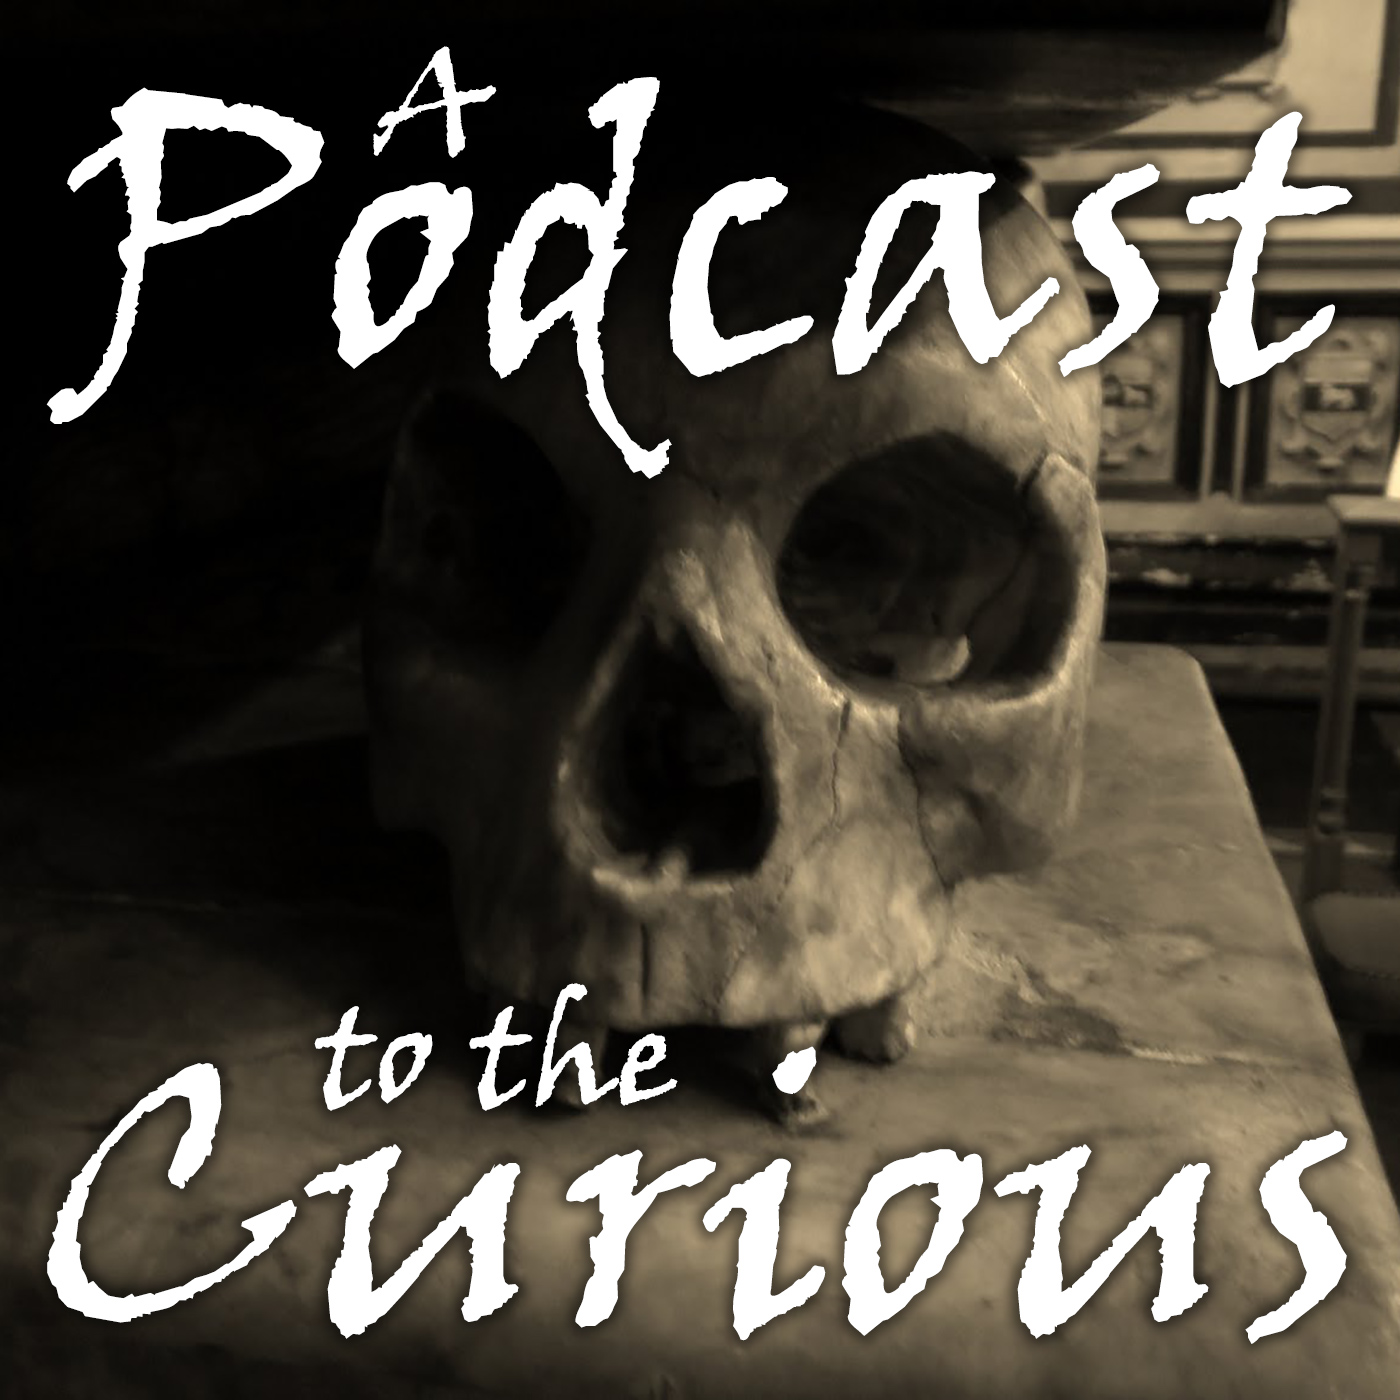  A Podcast to the Curious - The M.R. James Podcast